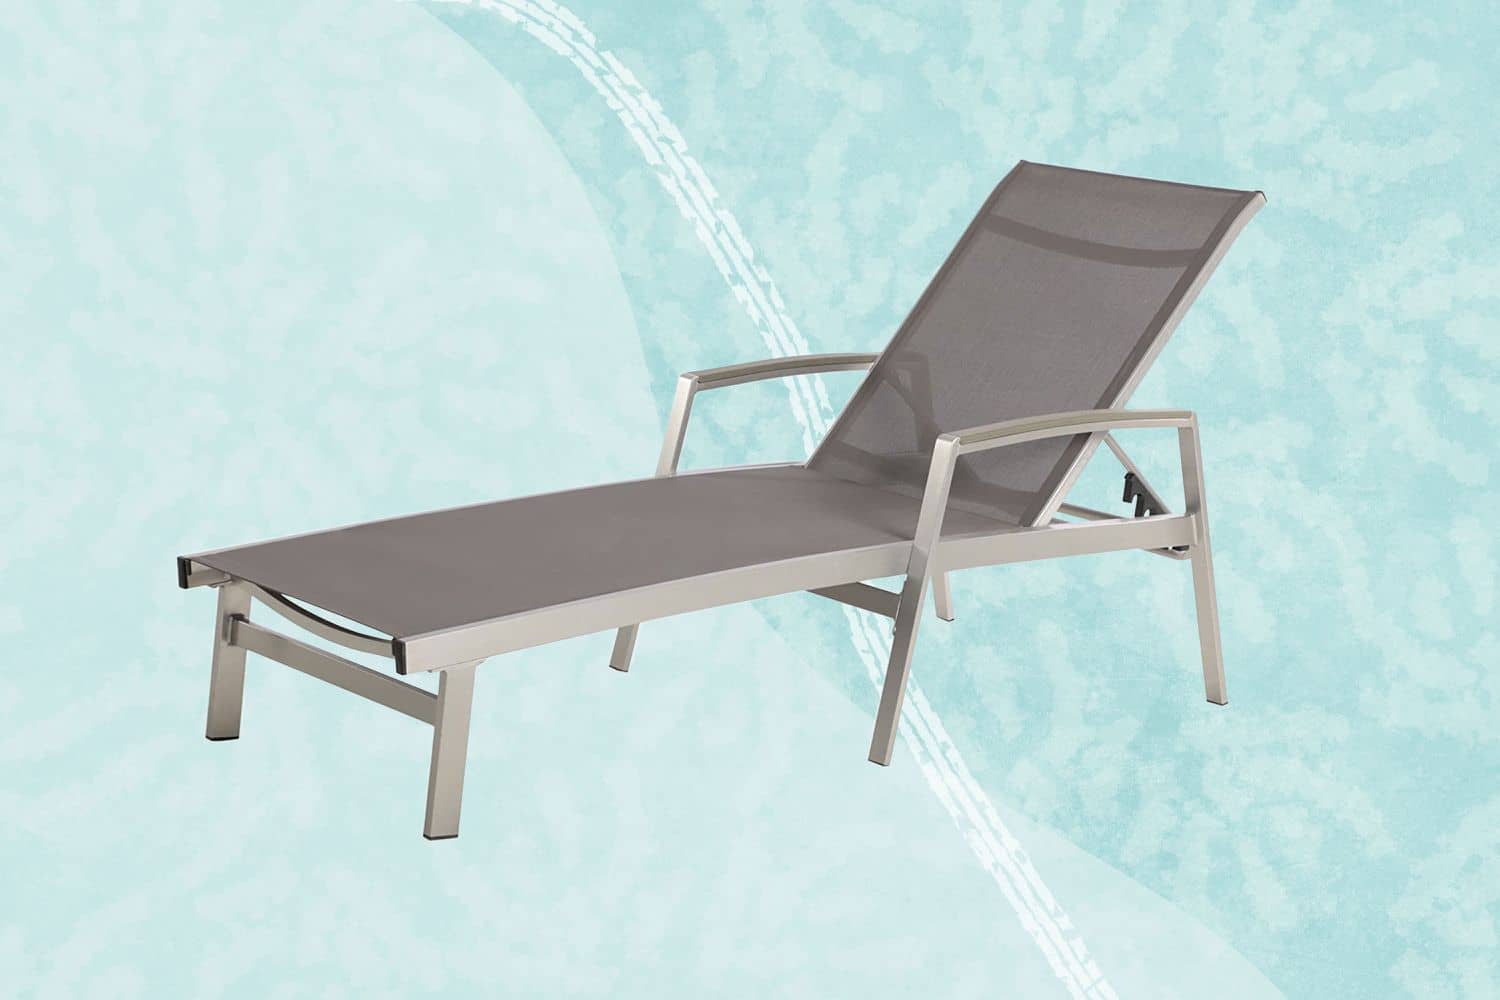 Customization Options for Chaise Lounge Chairs